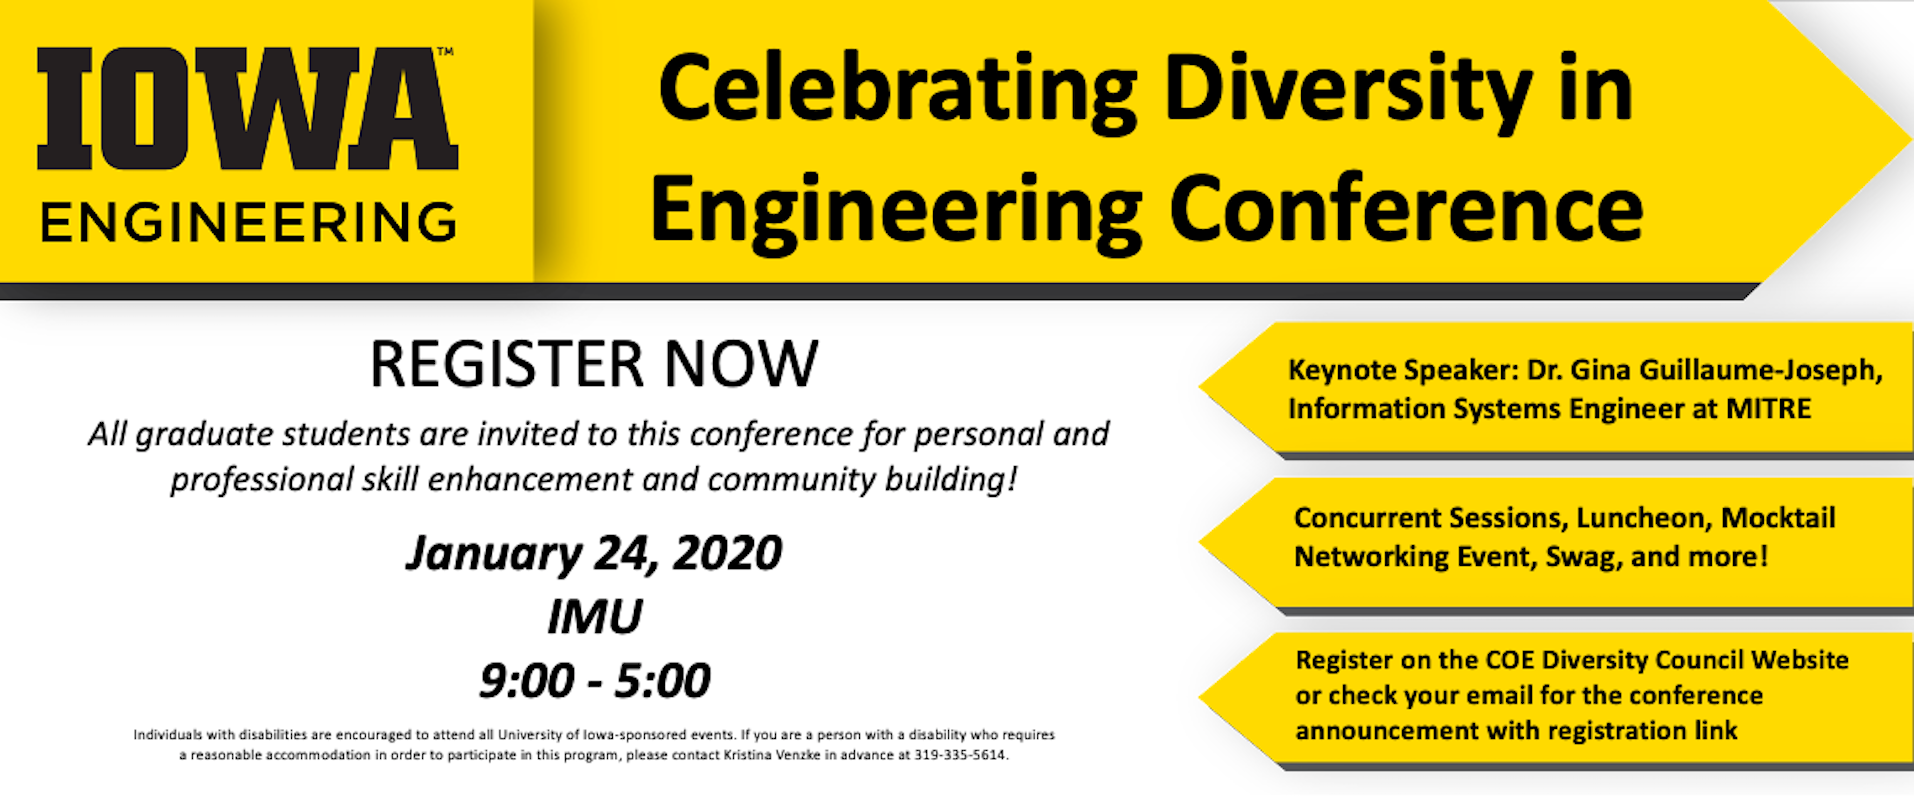 Celebrating Diversity in Engineering Conference